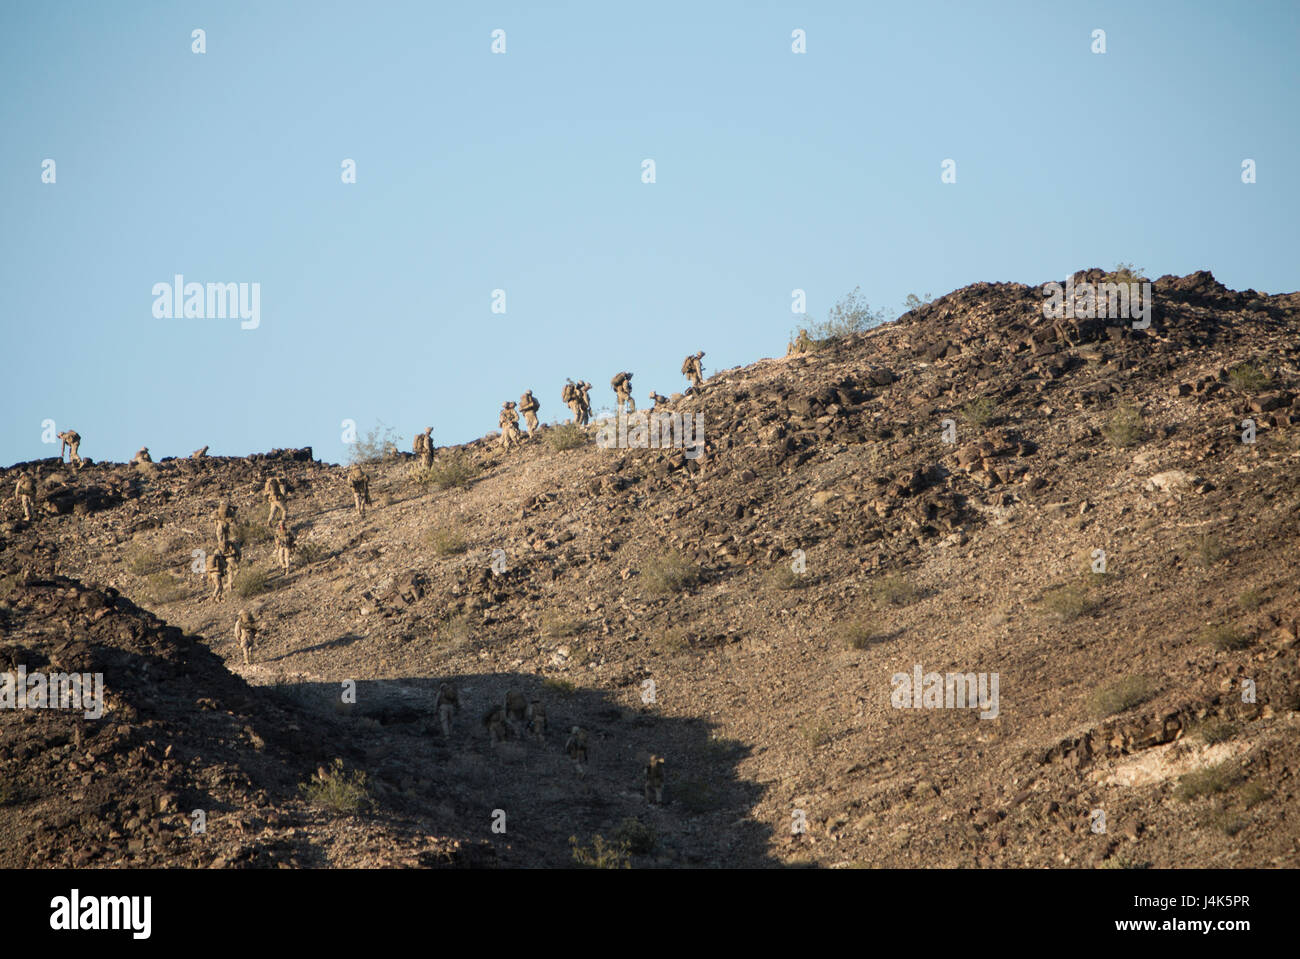 U.S. Marines with 2nd Battalion, 6th Marine Regiment, 2nd Marine Division (2d MARDIV), scale up a hill for a battalion-level defensive position for Talon Exercise (TalonEx) 2-17, Yuma, A.Z., April 18, 2017. The purpose of TalonEx was for ground combat units to conduct integrated training in support of the Weapons and Tactics Instructor Course (WTI) 2-17 hosted by Marine Aviation Weapons and Tactics Squadron One (MAWTS-1). Stock Photo